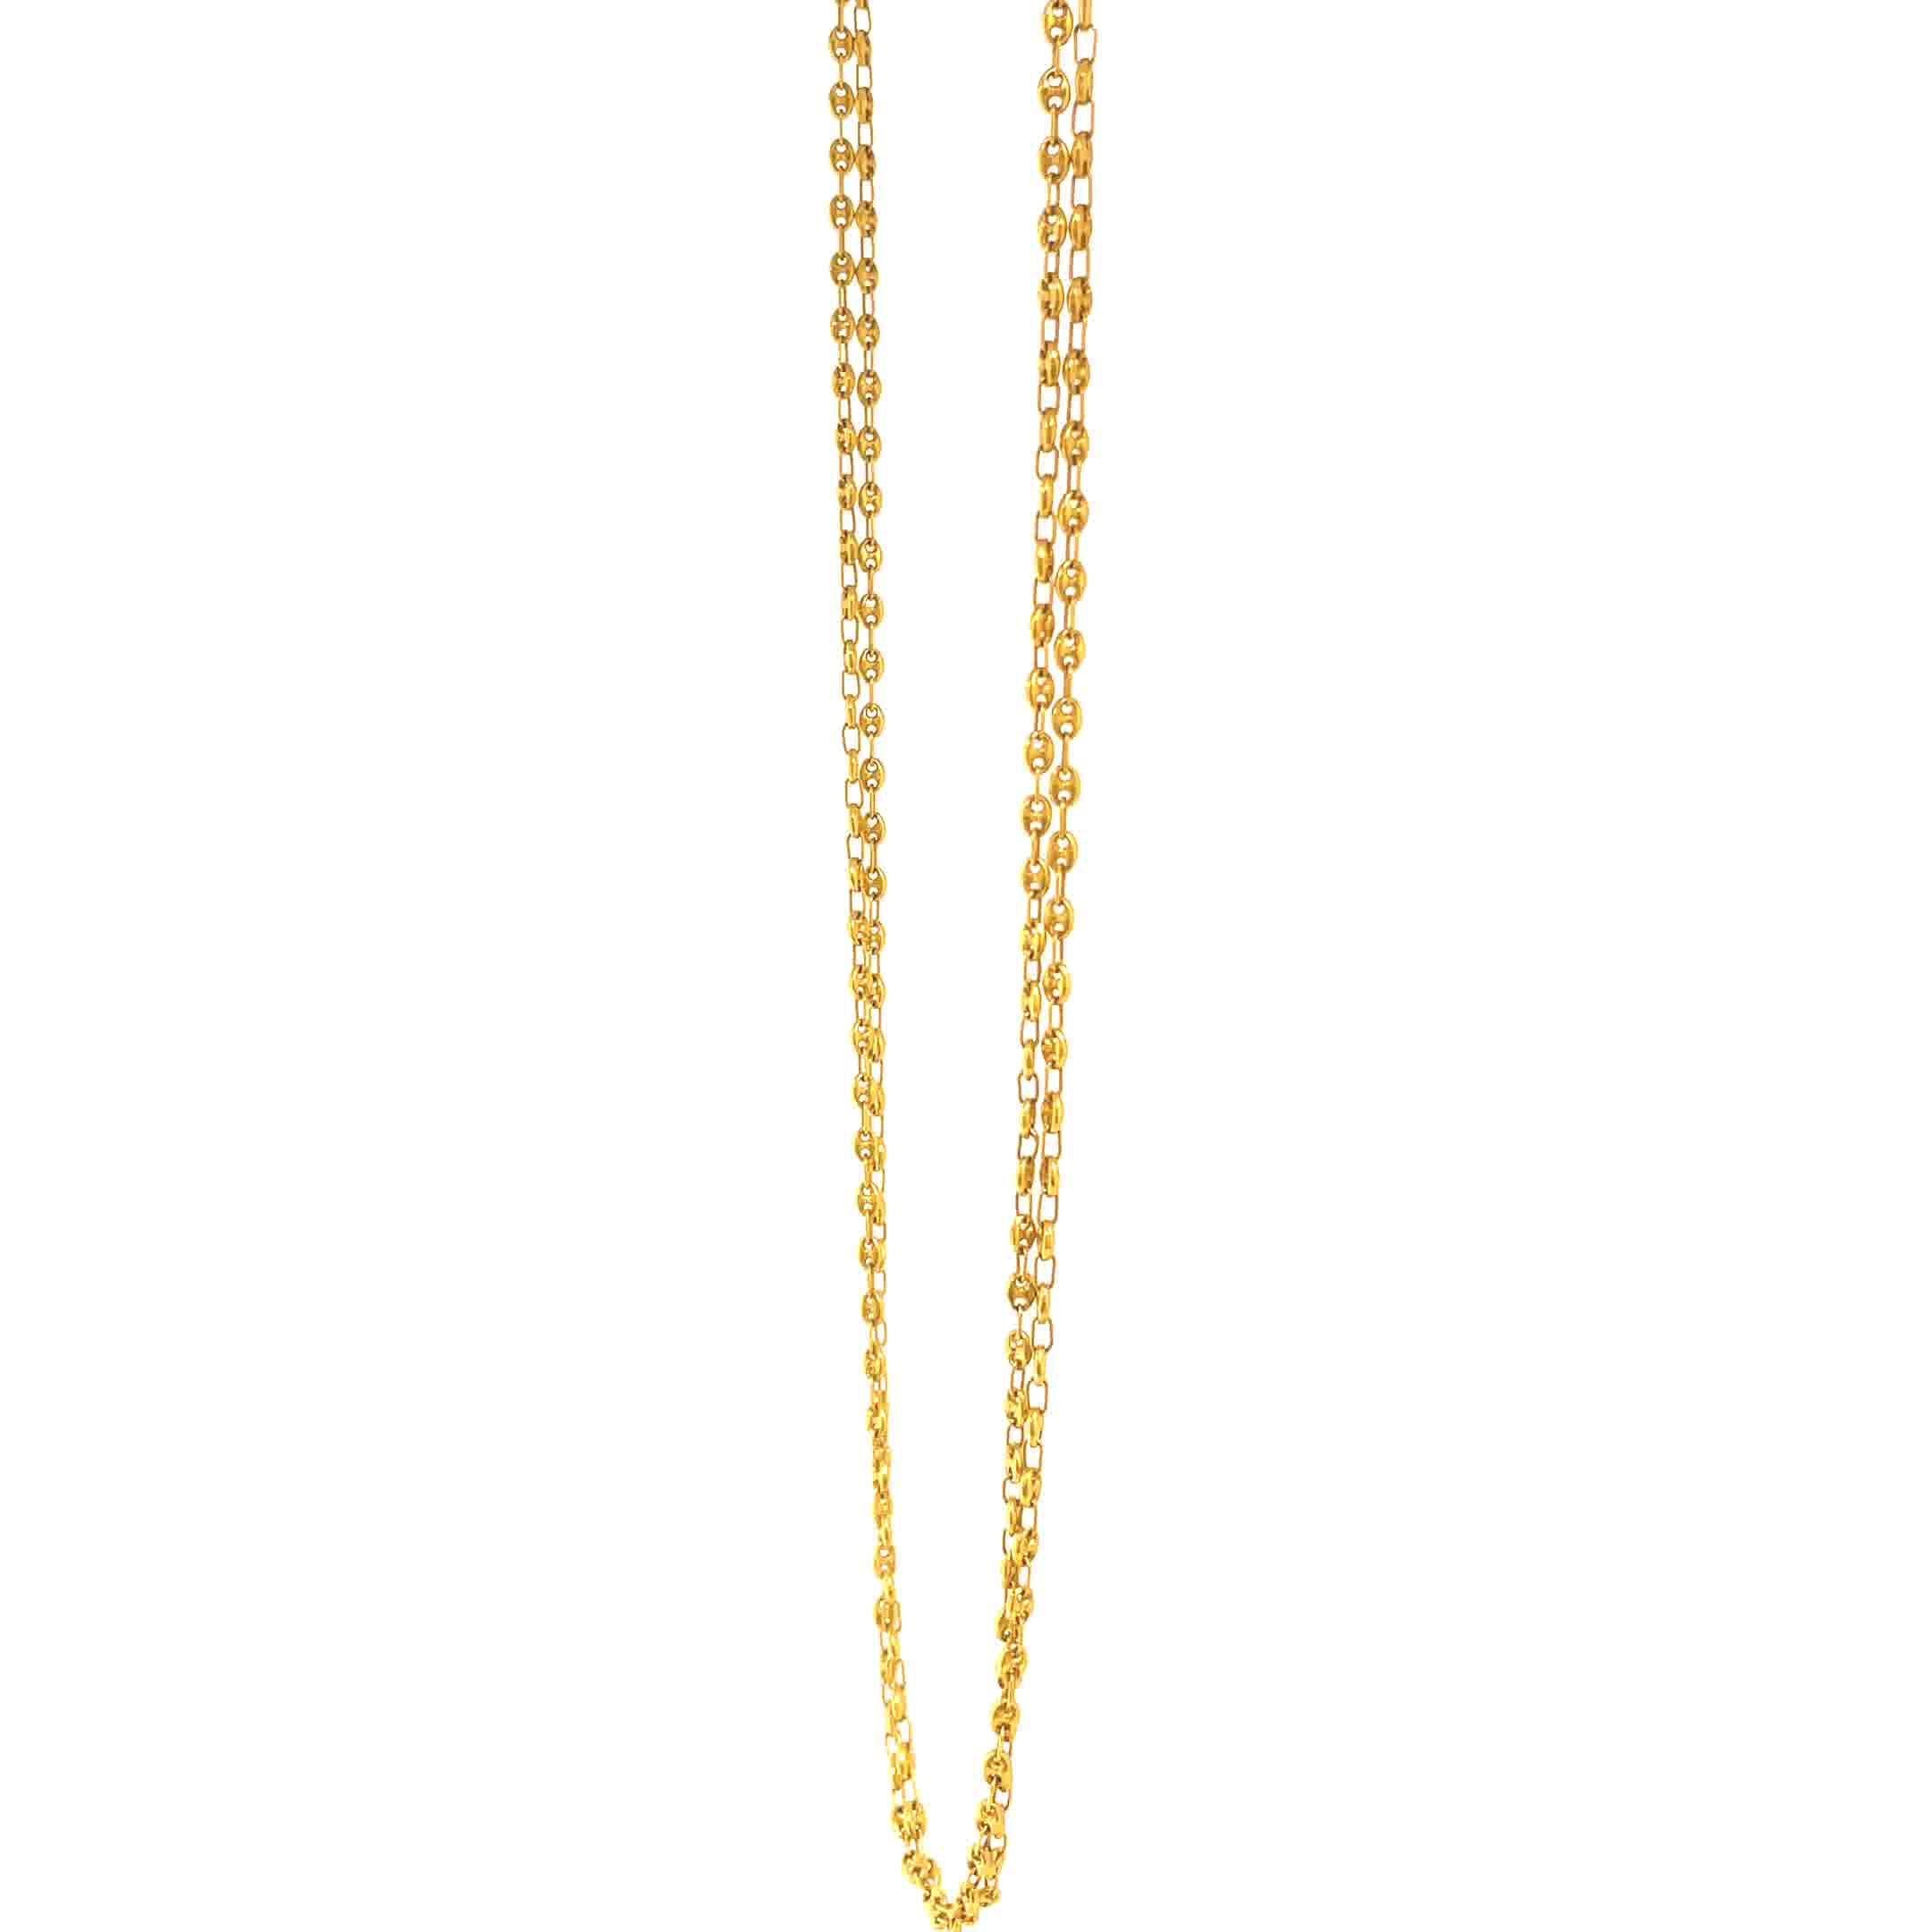 Are you looking to update your vintage jewelry collection? This year, chic, gold and stylish pieces are in the lead of all fashion trends. This necklace is a must have! Vintage Italian Mariner's Link Chain. Italian hallmarks. Length is 40 inches.